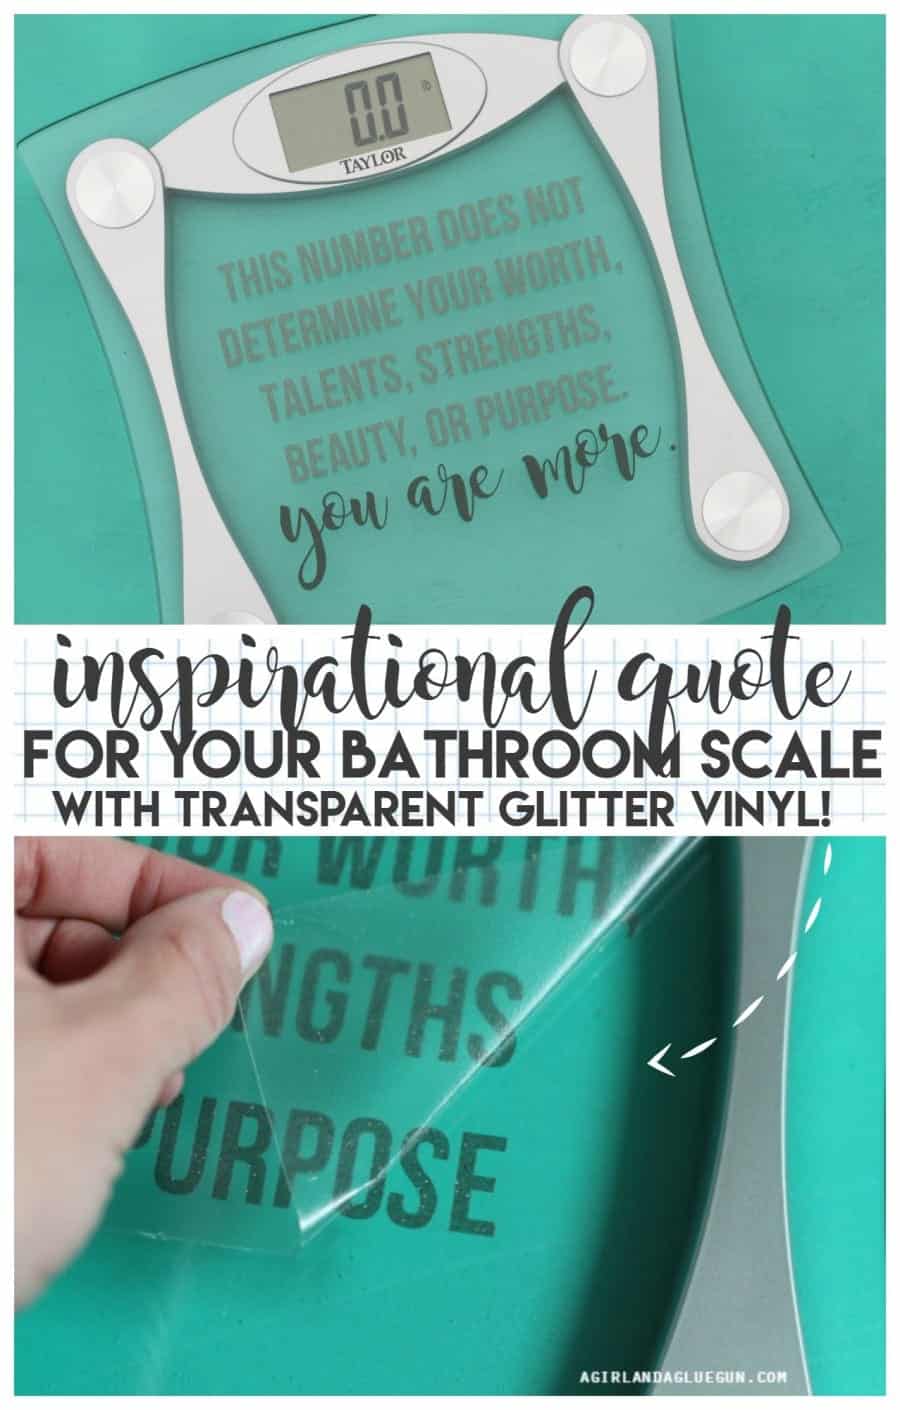 inspirational quote for your bathroom scale with transparent glitter vinyl